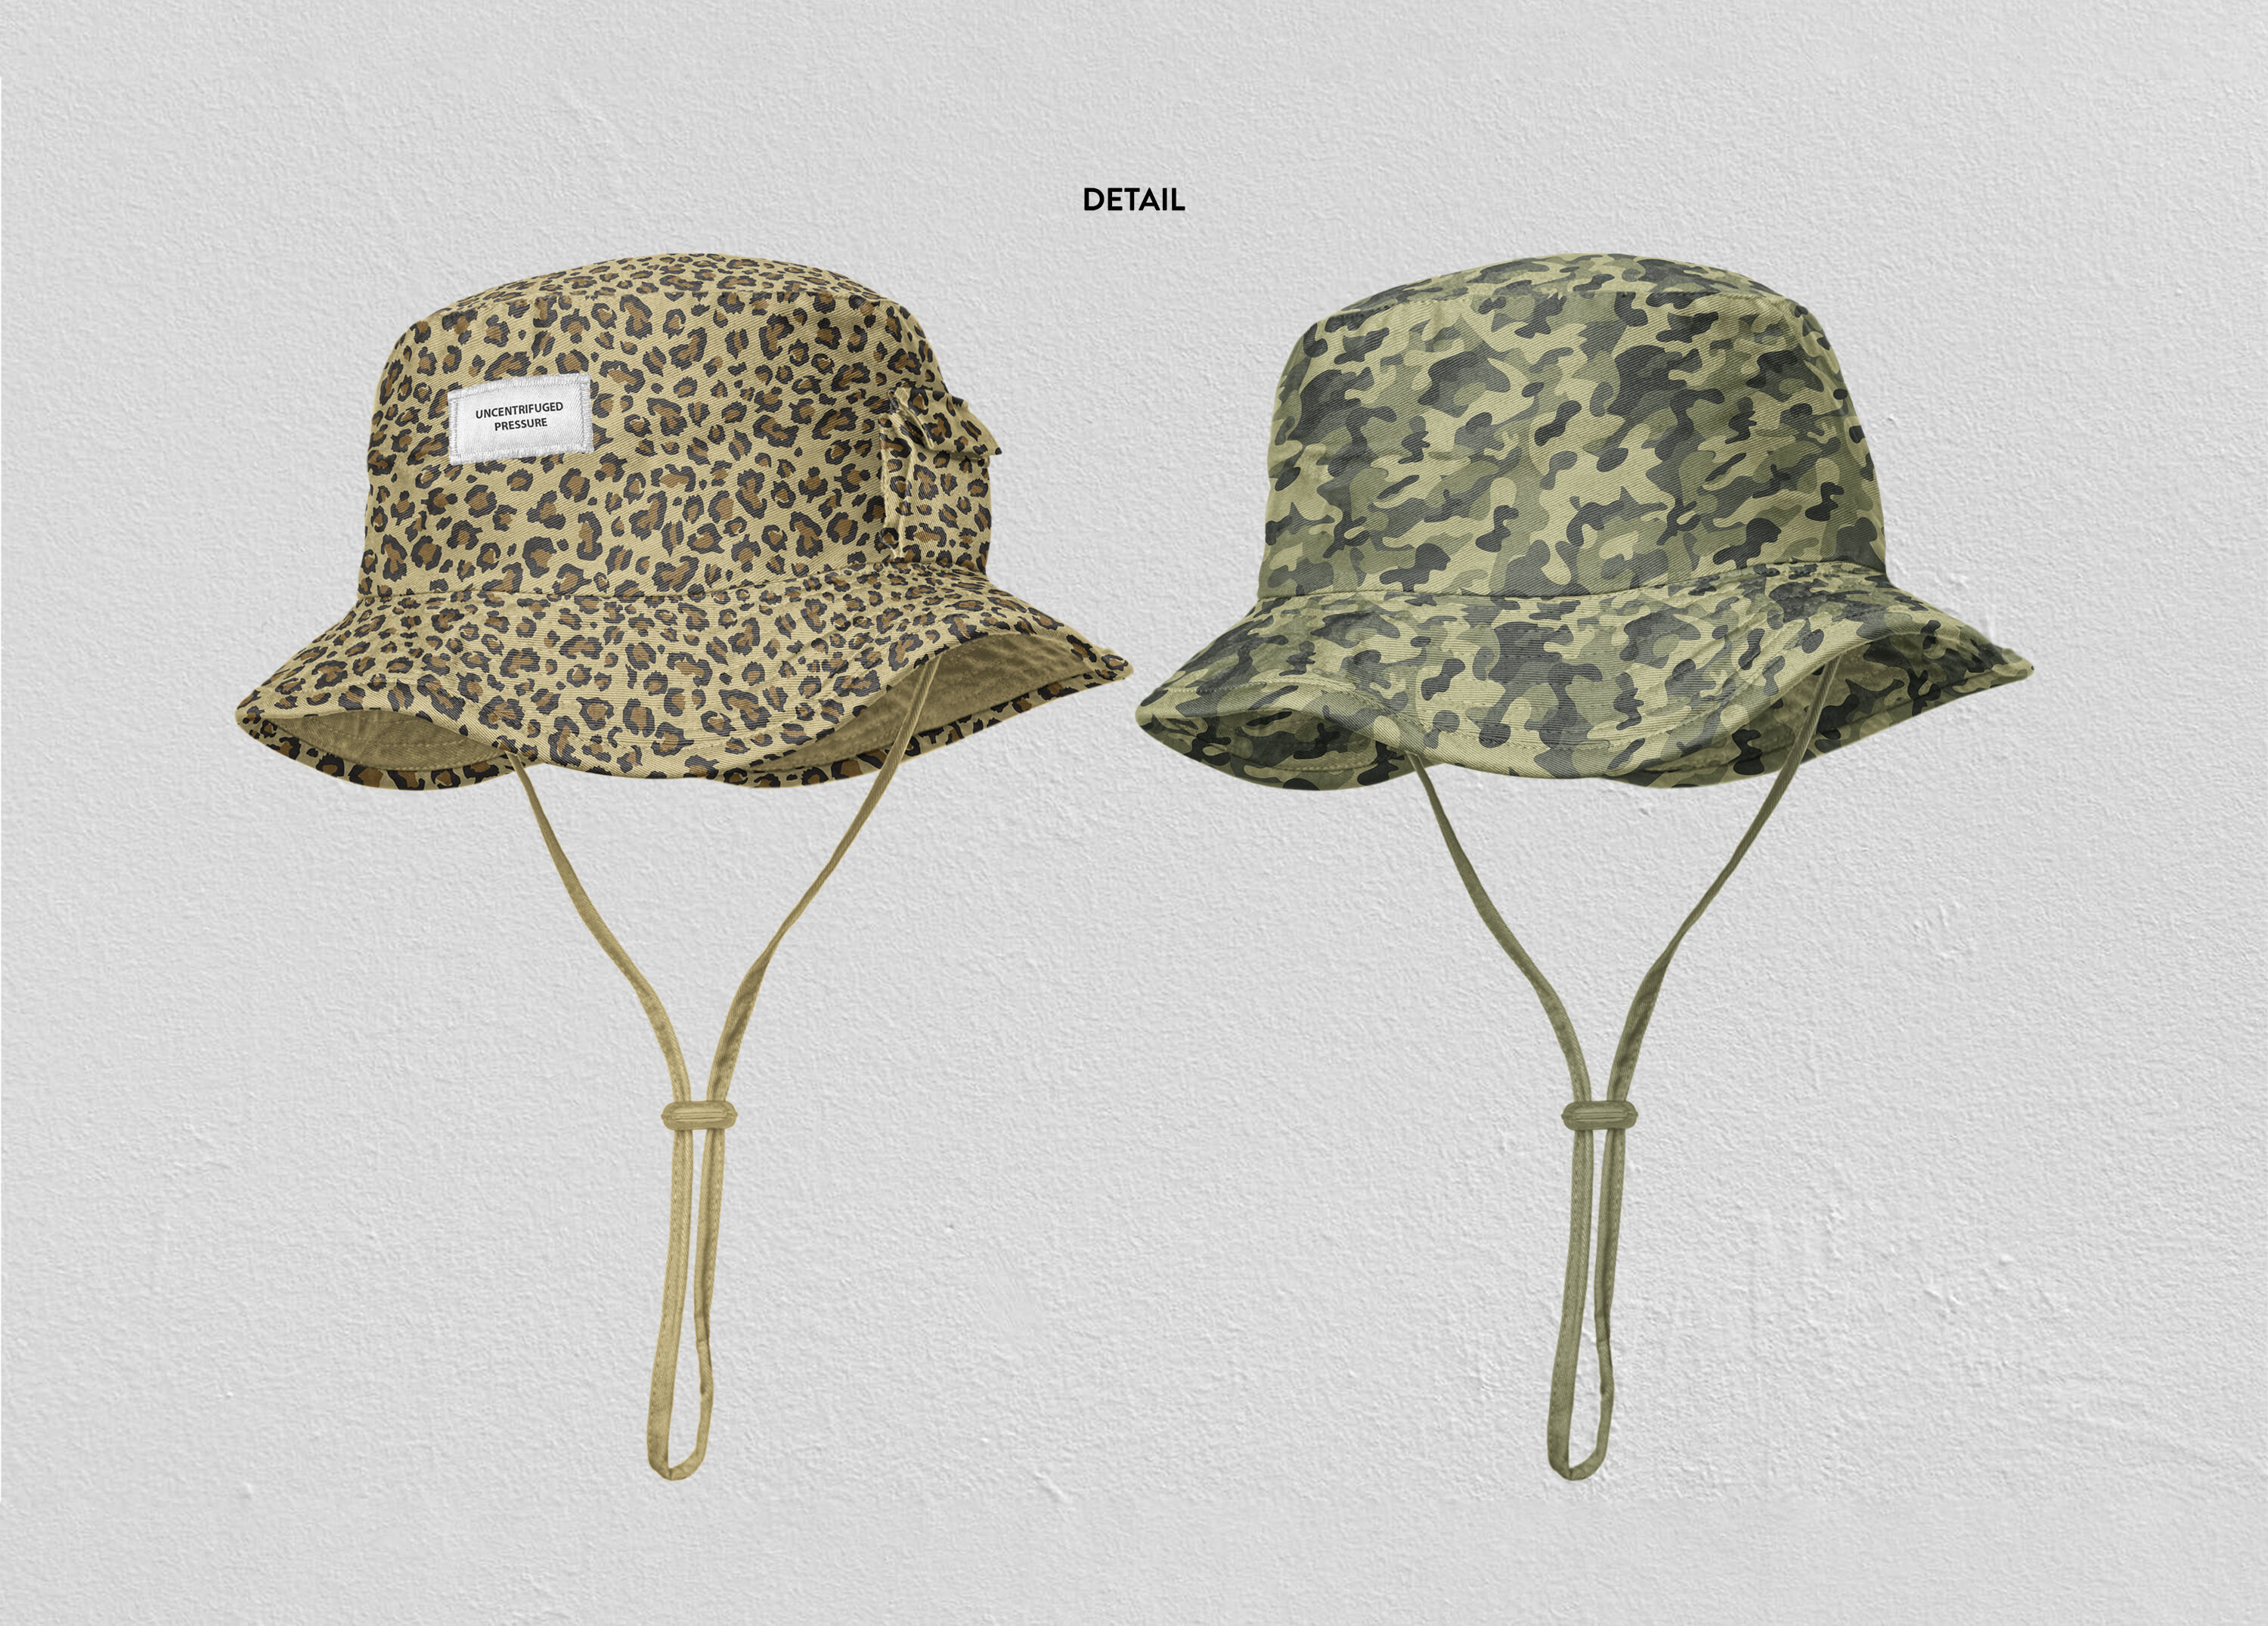 Download Bucket Hat Mockup By Uncentrifuged Pressure | TheHungryJPEG.com